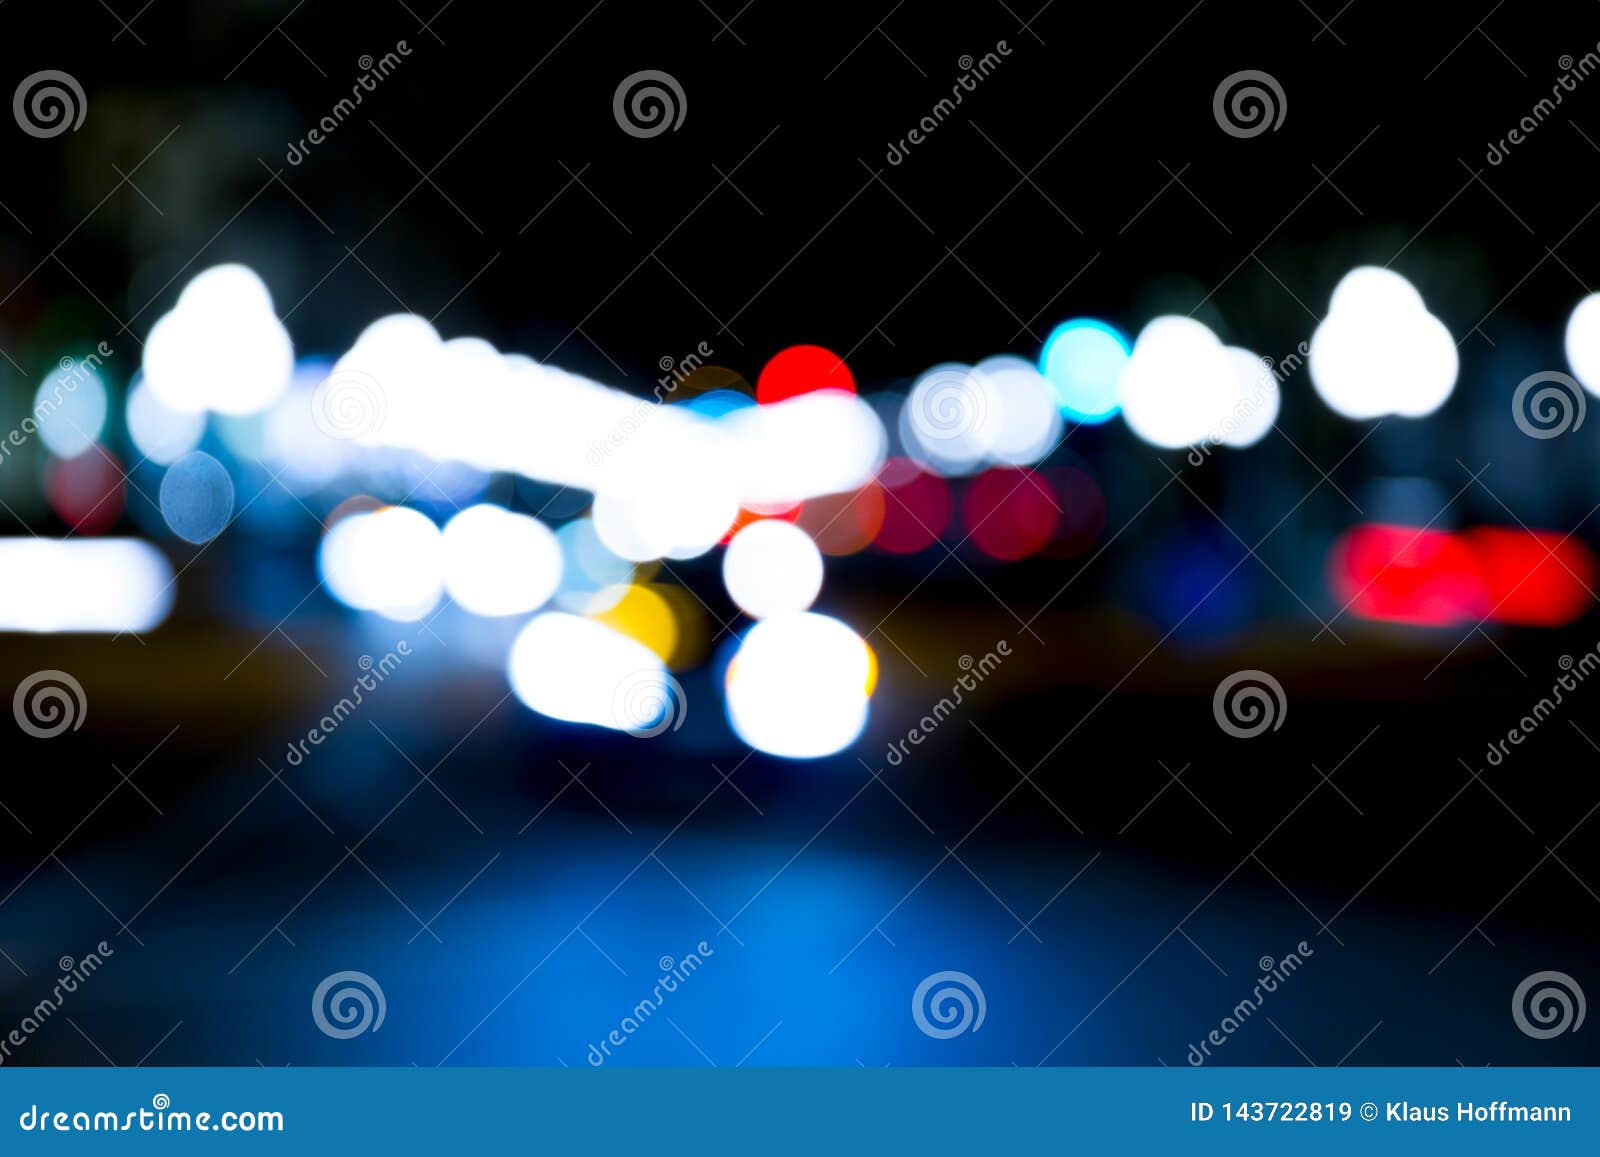 Abstract Traffic Lights on Urban Street at Night Stock Image - Image of ...